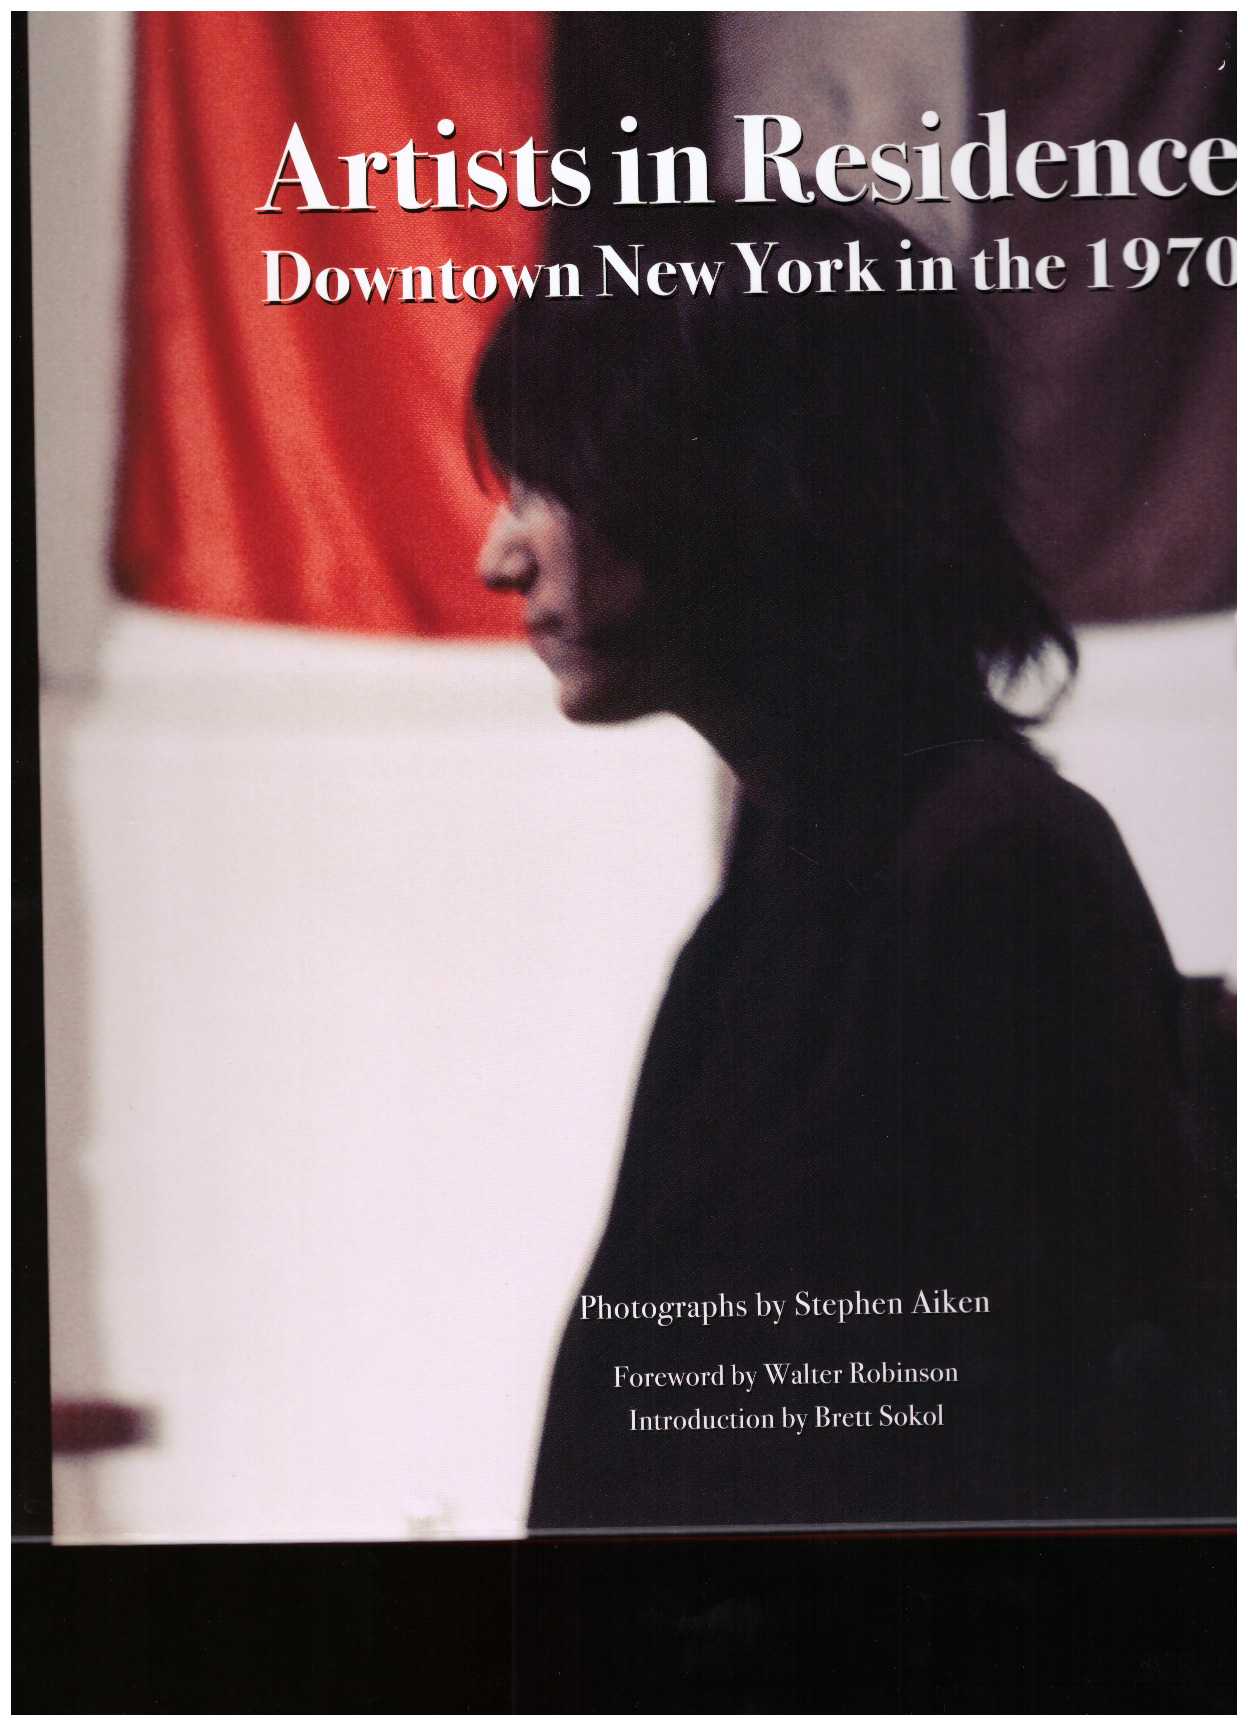 AIKEN, Stephen - Artists in Residence: Downtown New York in the 1970s